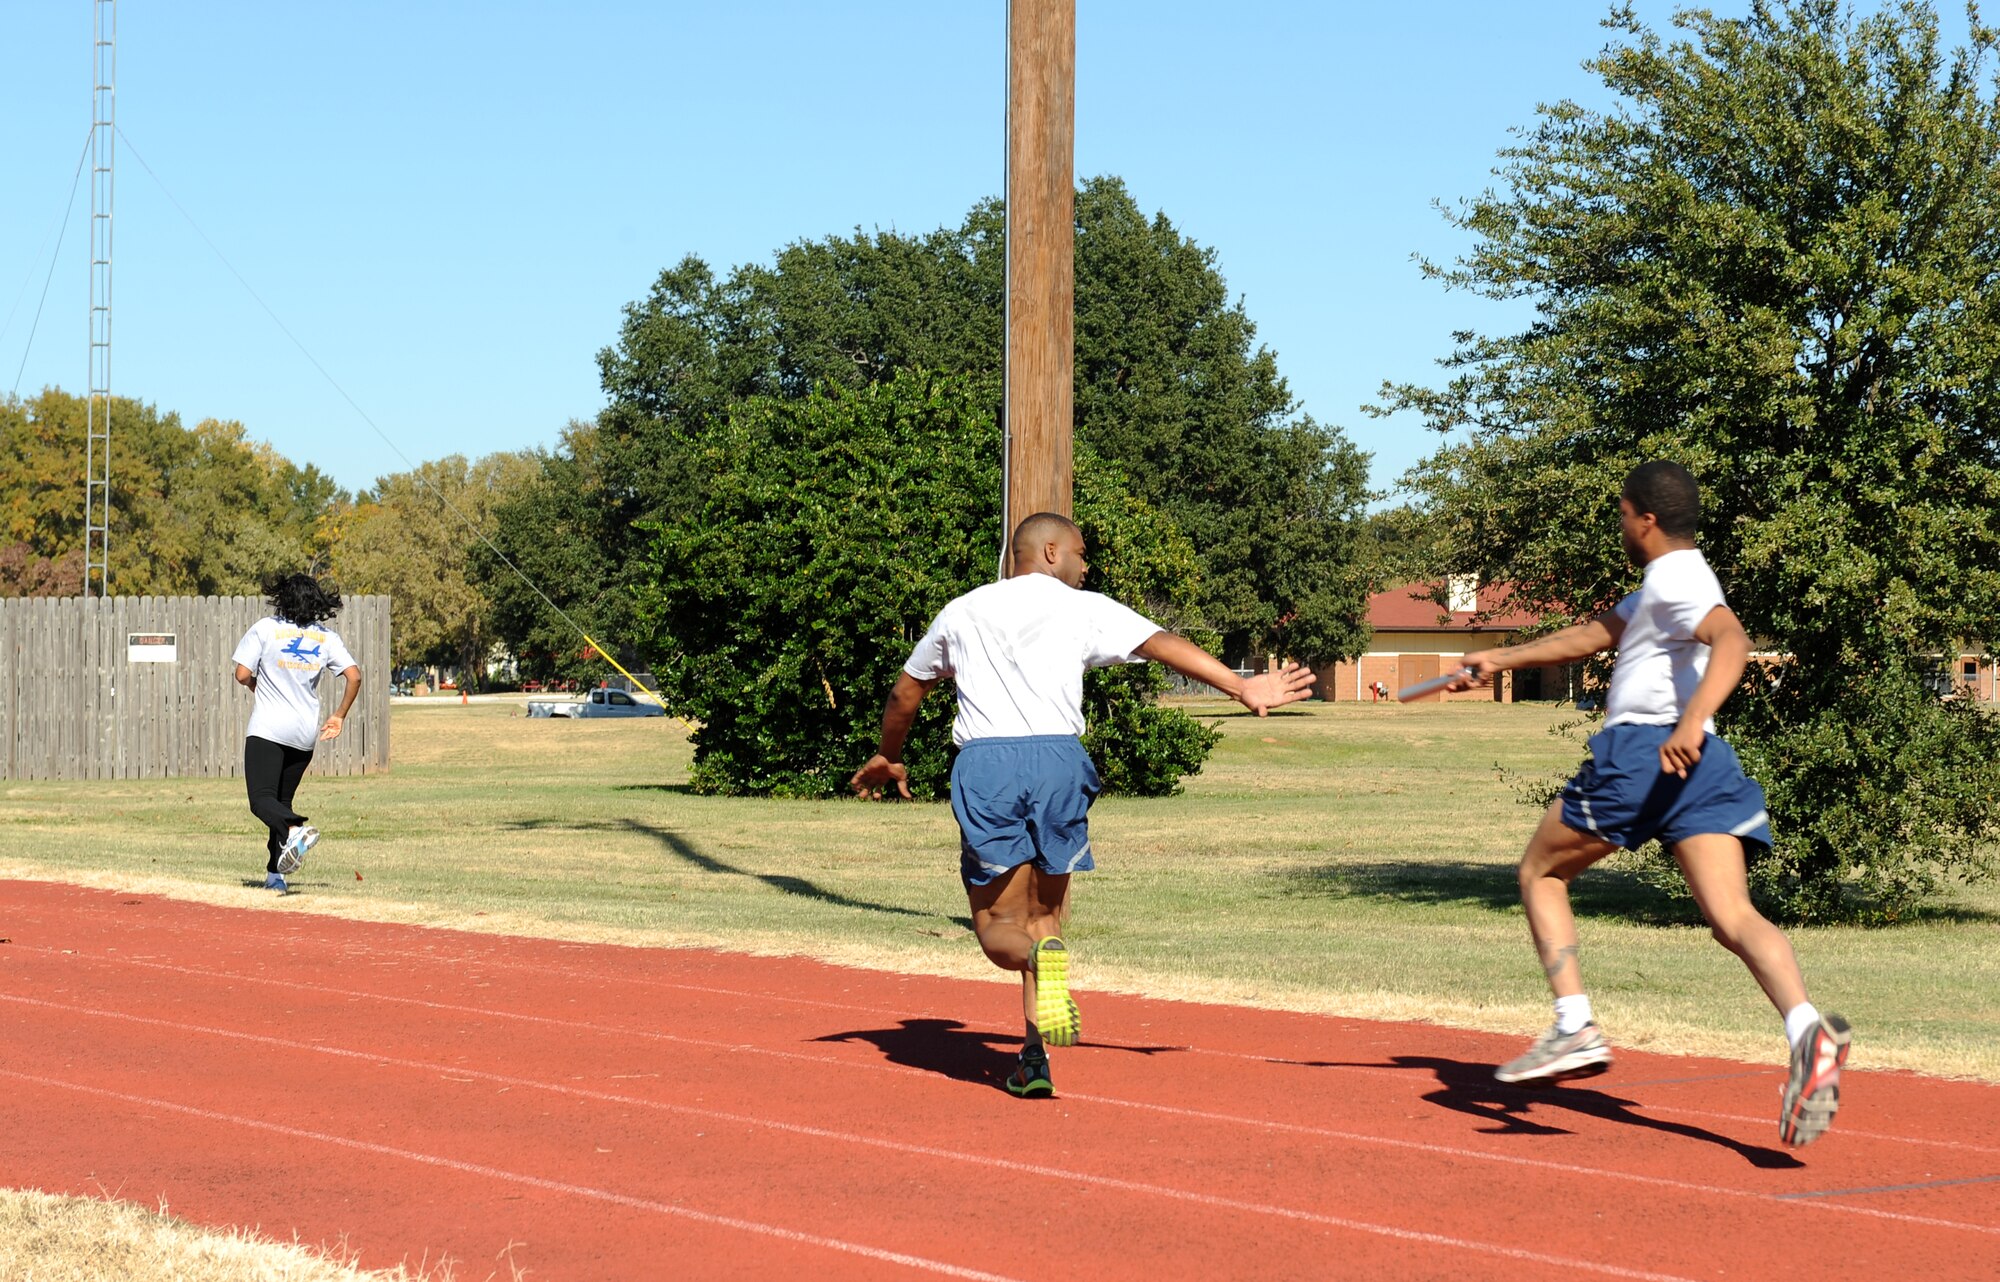 A Barksdale Airman passes off a baton during the 4x100 relay race and part of the 2012 Sports Day on Barksdale Air Force Base, La., Nov. 16. Sports Day consisted of various team events including dodgeball, basketball, soccer, tug-of-war, volleyball, a homerun derby, flag football and racquetball. This day was designed to improve teamwork, and help increase the awareness of fitness, sports programs and boost morale. (U.S. Air Force photo/Airman 1st Class Benjamin Gonsier)(RELEASED)
